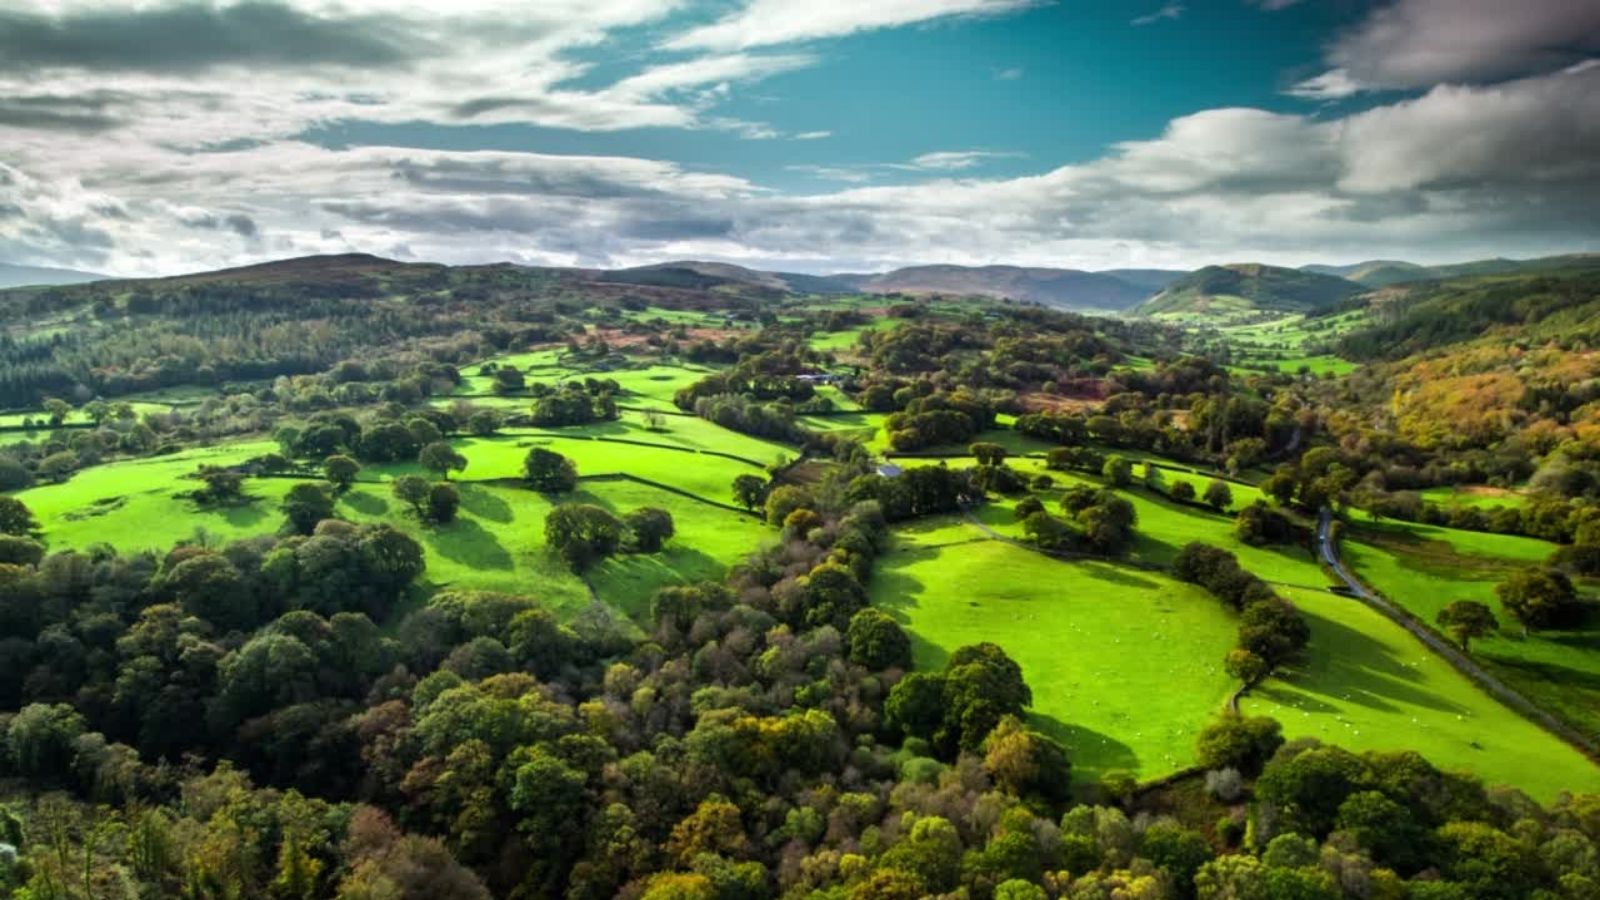 Hills and trees in the Welsh Countryside.jpg Hills and trees in the Welsh Countryside